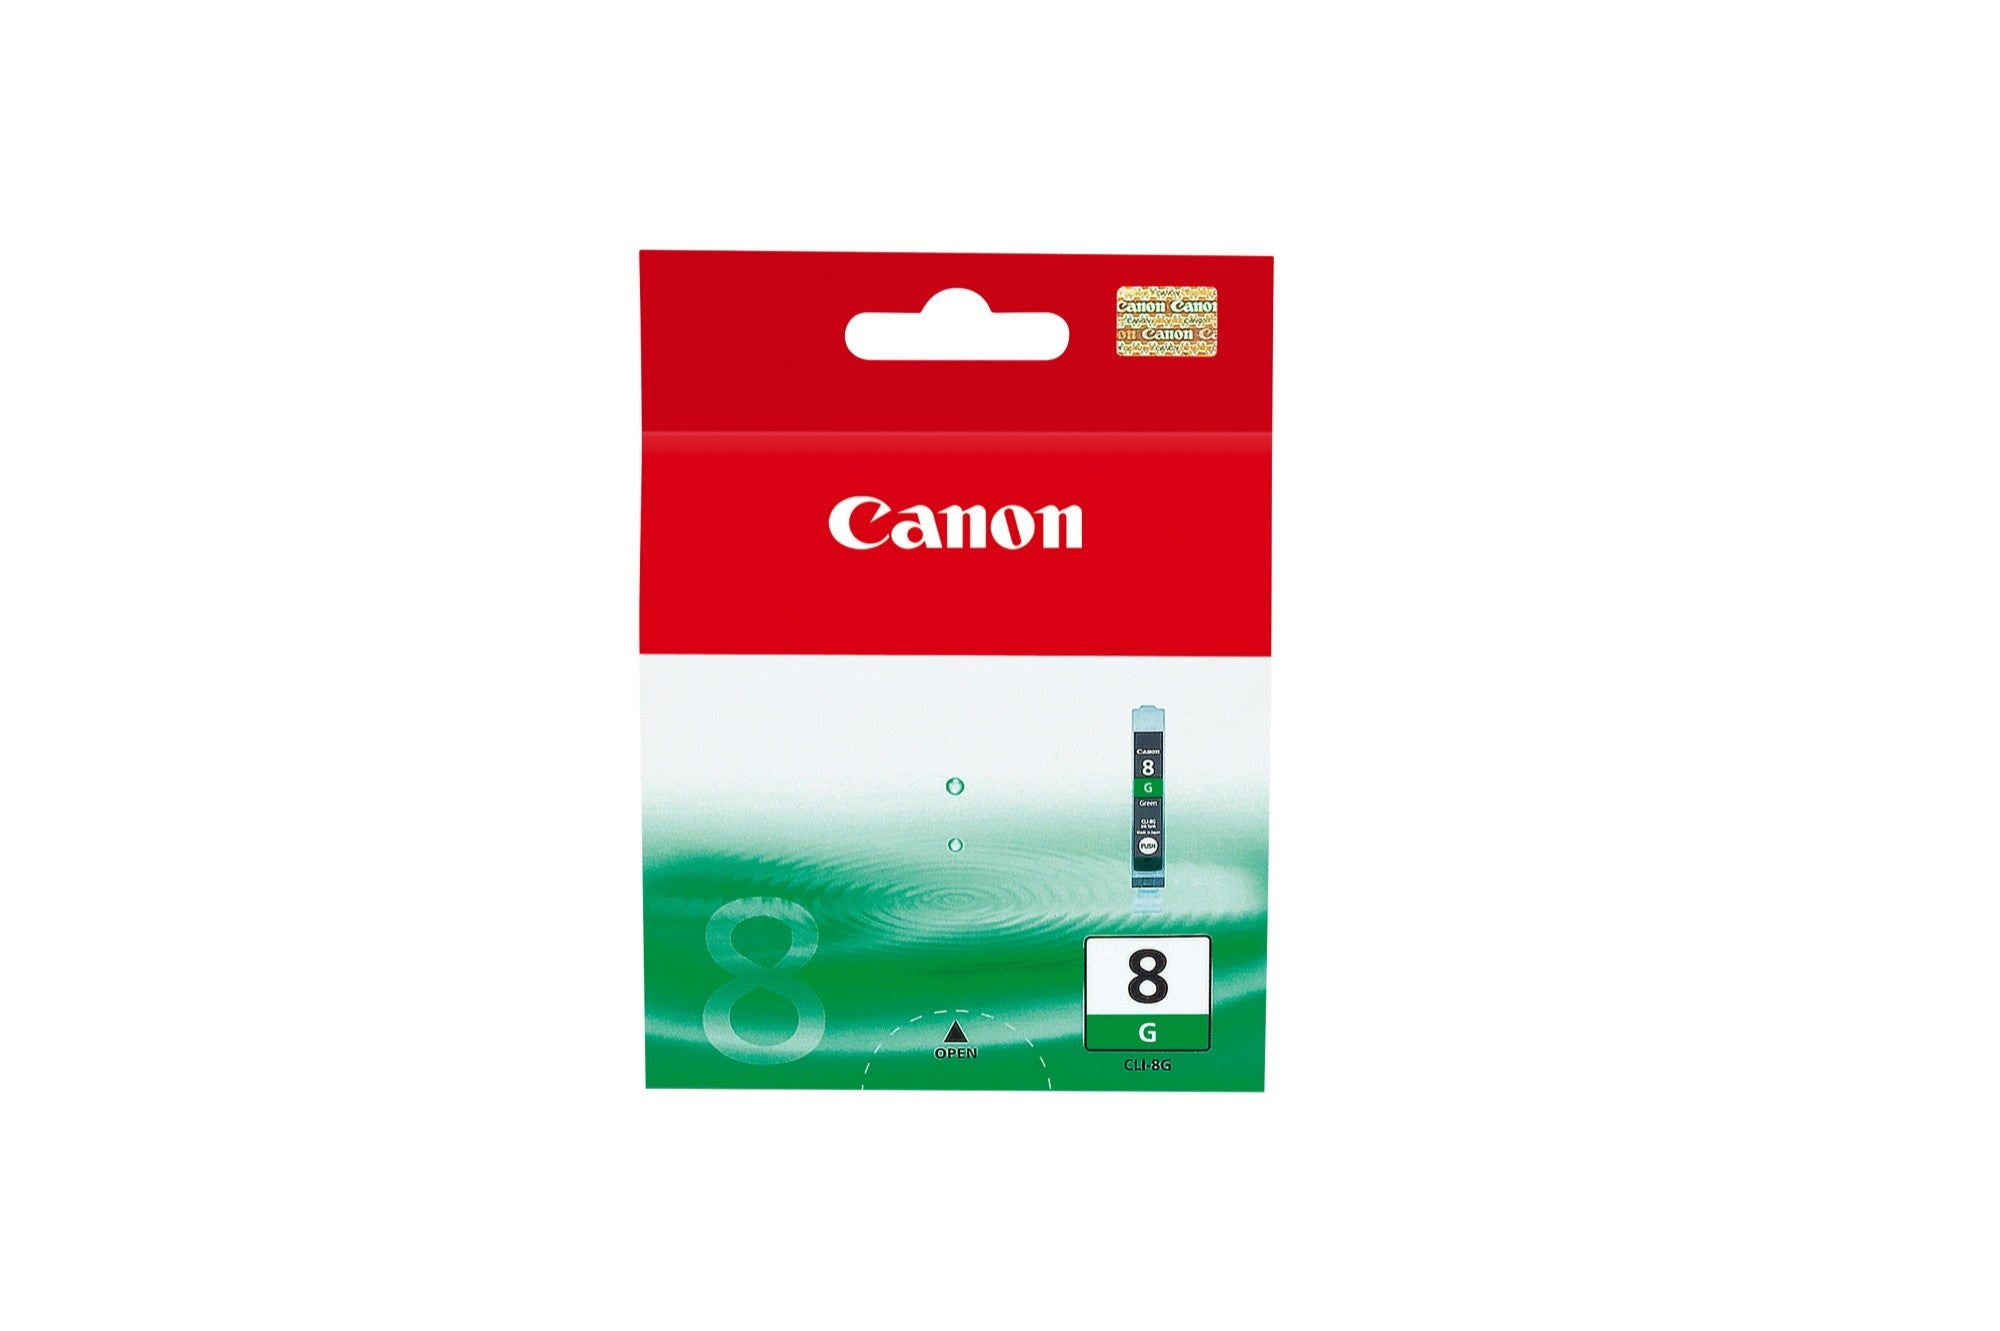 Canon 0627B001/CLI-8G Ink cartridge green, 5.85K pages 13ml for Canon Pixma Pro 9000